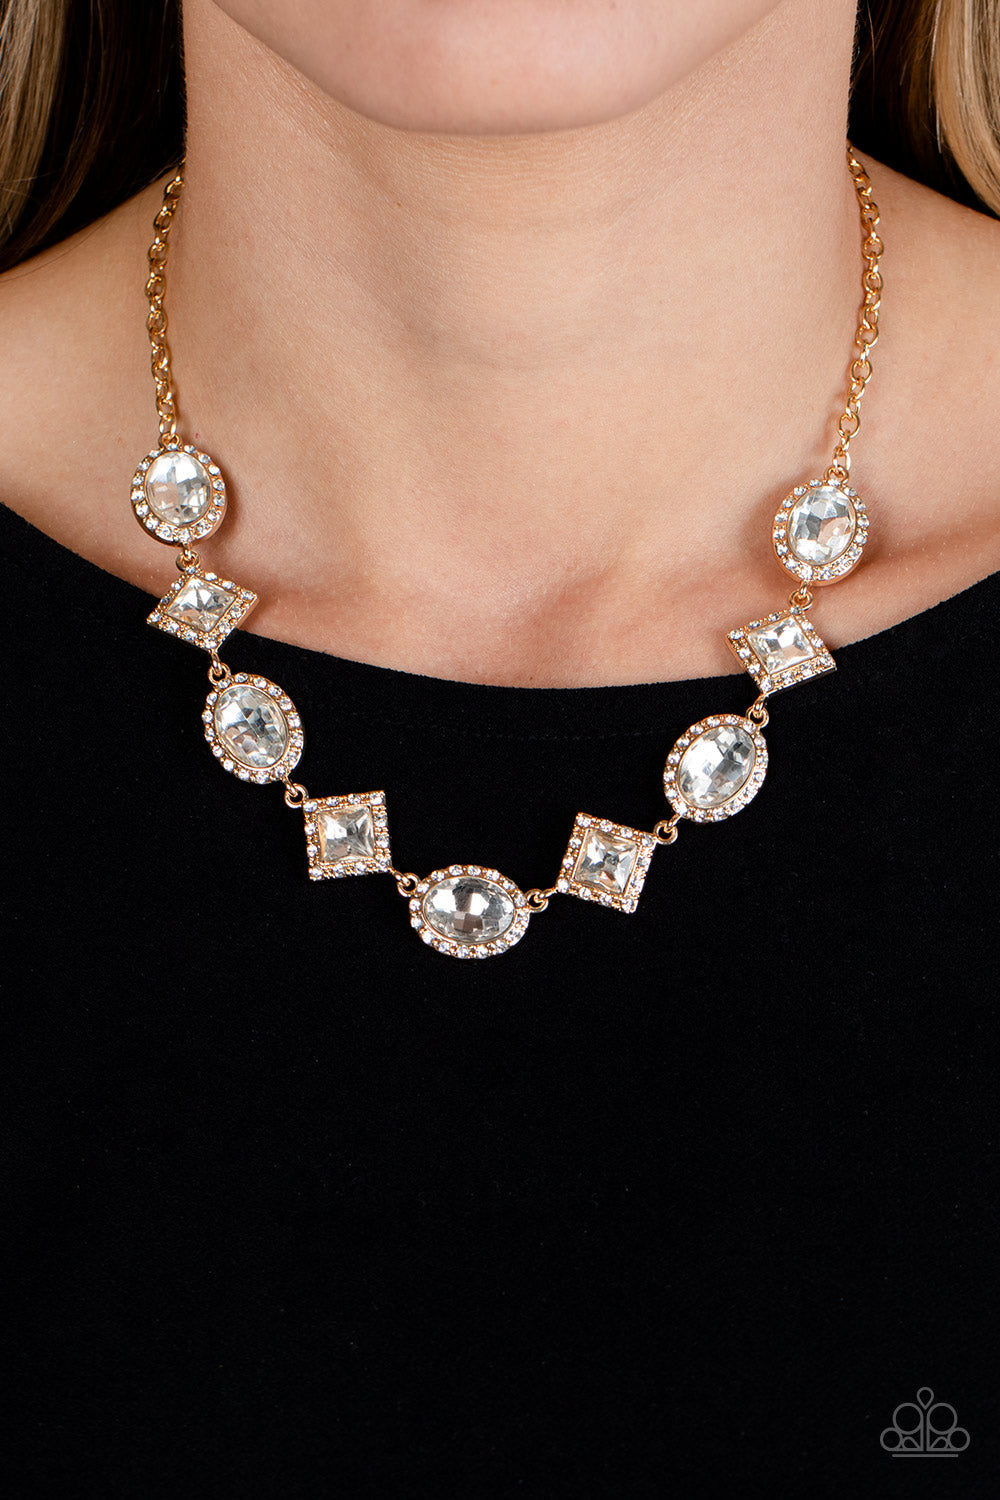 Paparazzi Accessories Diamond of the Season - Gold Dazzling white rhinestones, in both oval and square cuts, fall along the collar in an alternating pattern. Each gem is set against a backdrop of gold and bordered by tiny white rhinestones, amplifying the